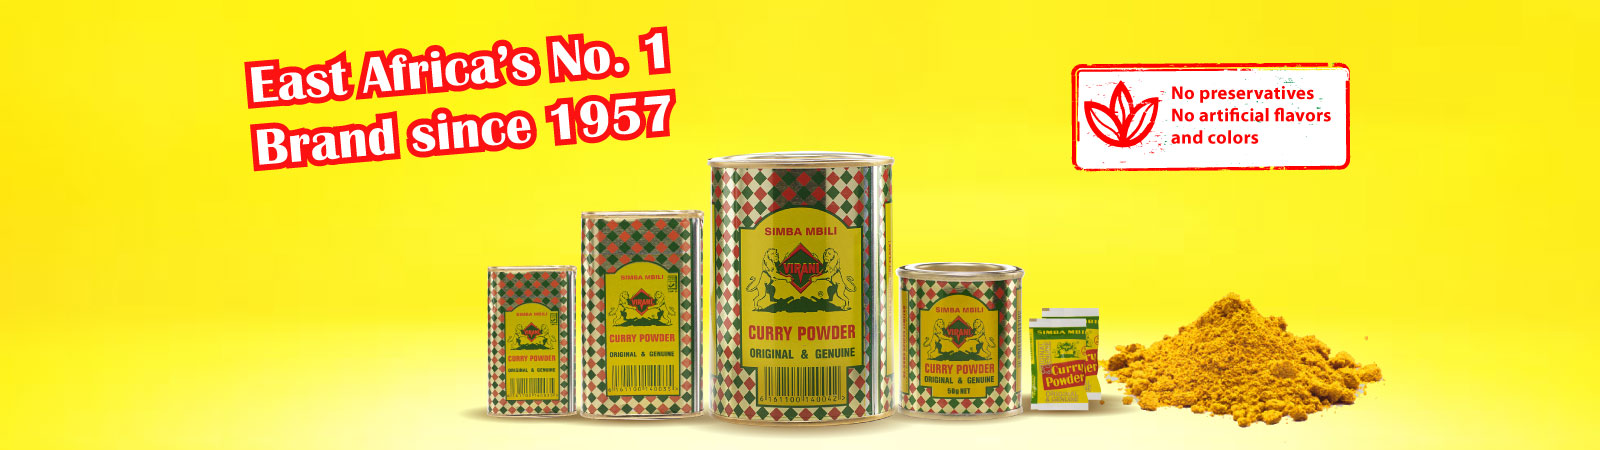 Simba Mbili -East Africa's number 1 curry powder spice since 1957